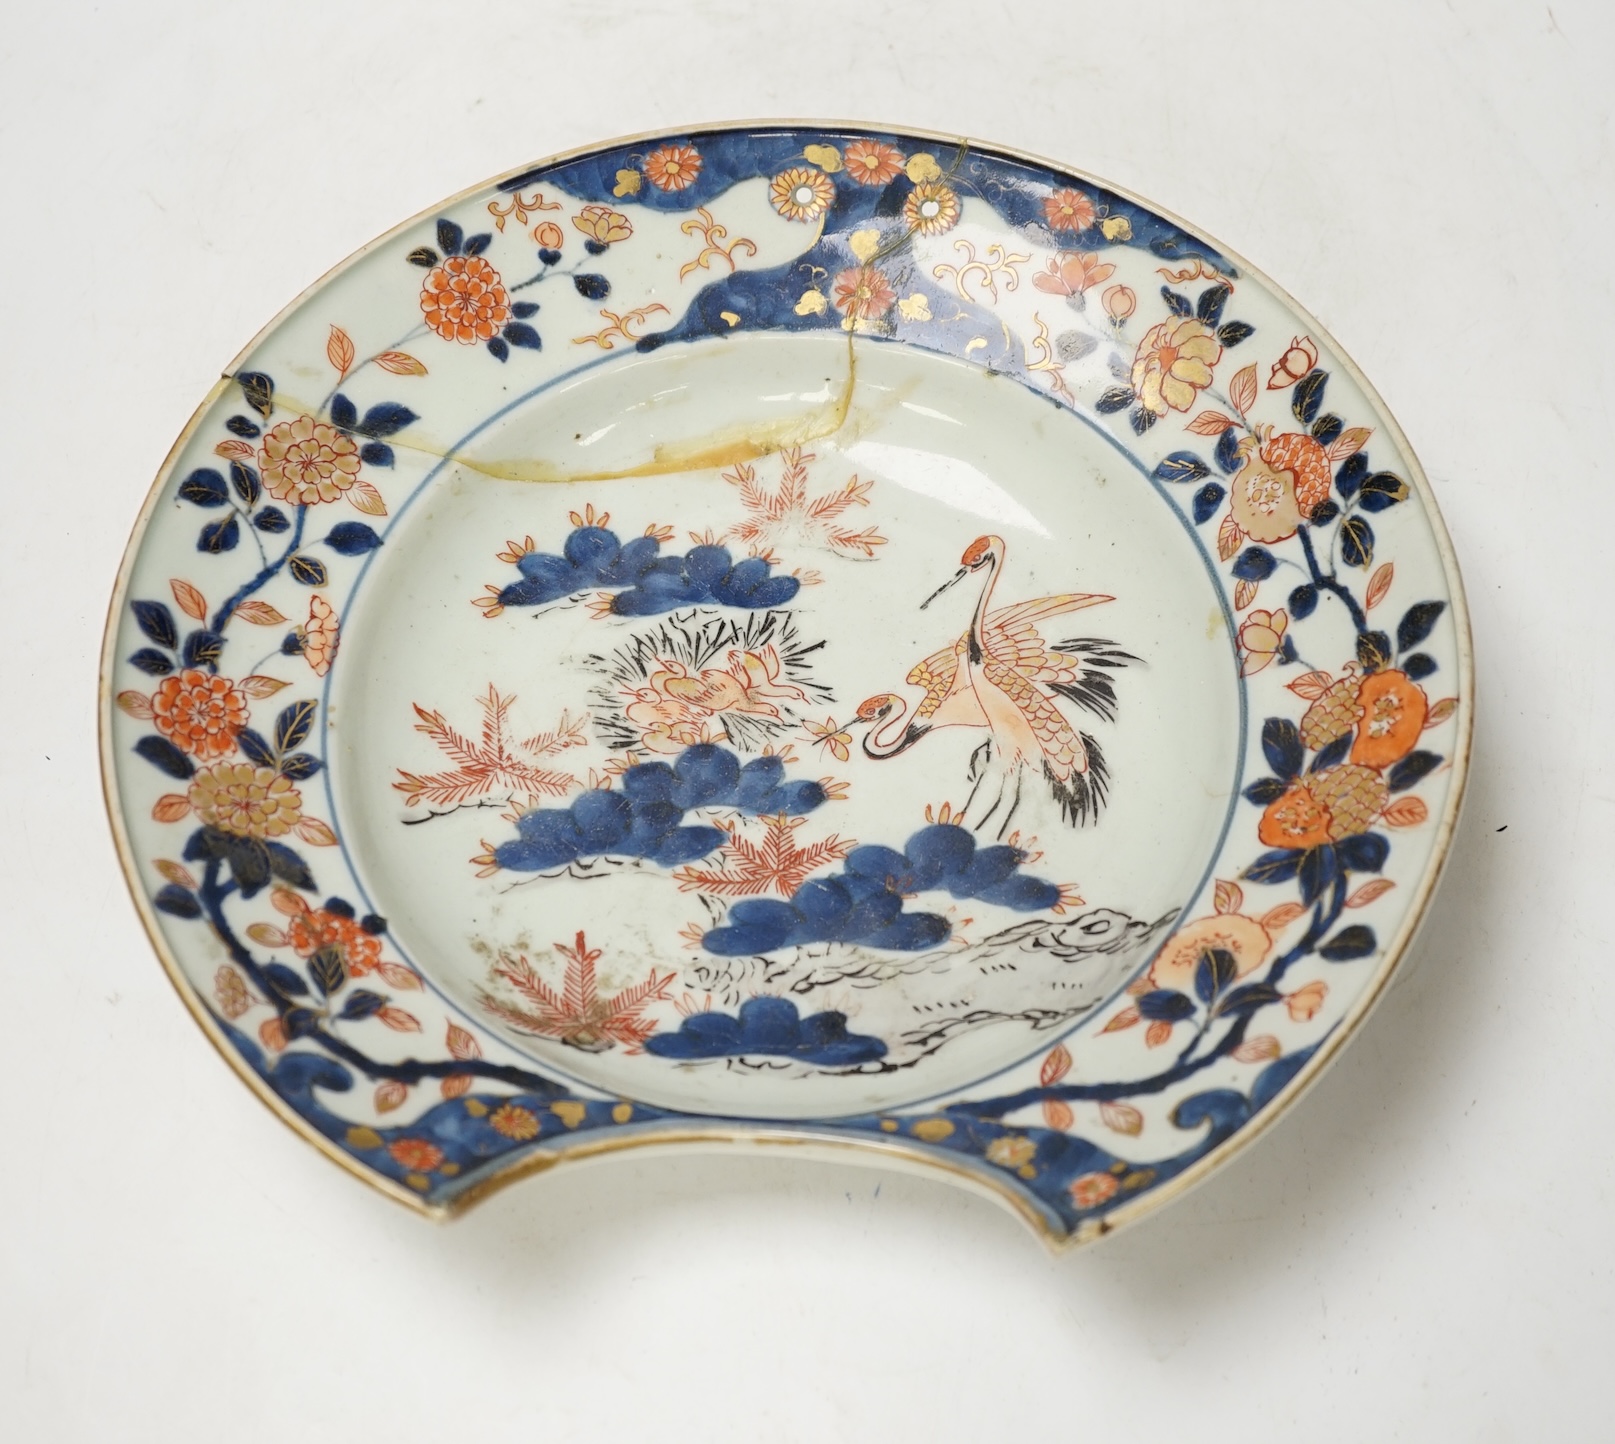 A Japanese Arita ‘cranes and chicks’ barber's bowl, early 18th century, in Imari palette, 27.5cm diameter. Condition - poor (a.f.)